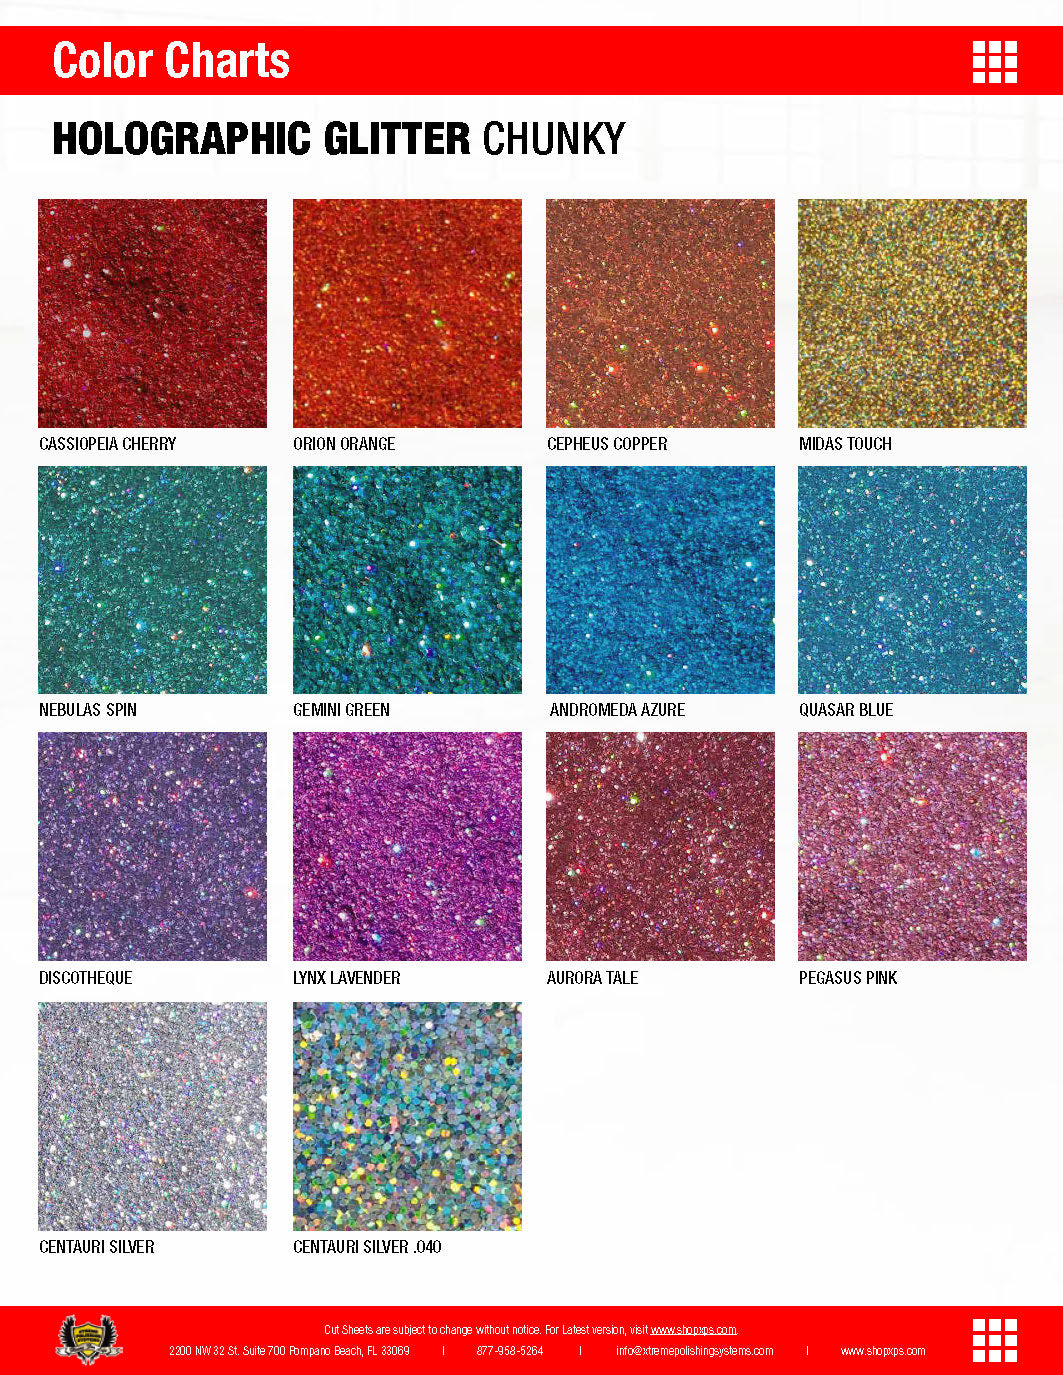 XPS Holographic Glitter Chunky Color Chart with color pigments swatches and name